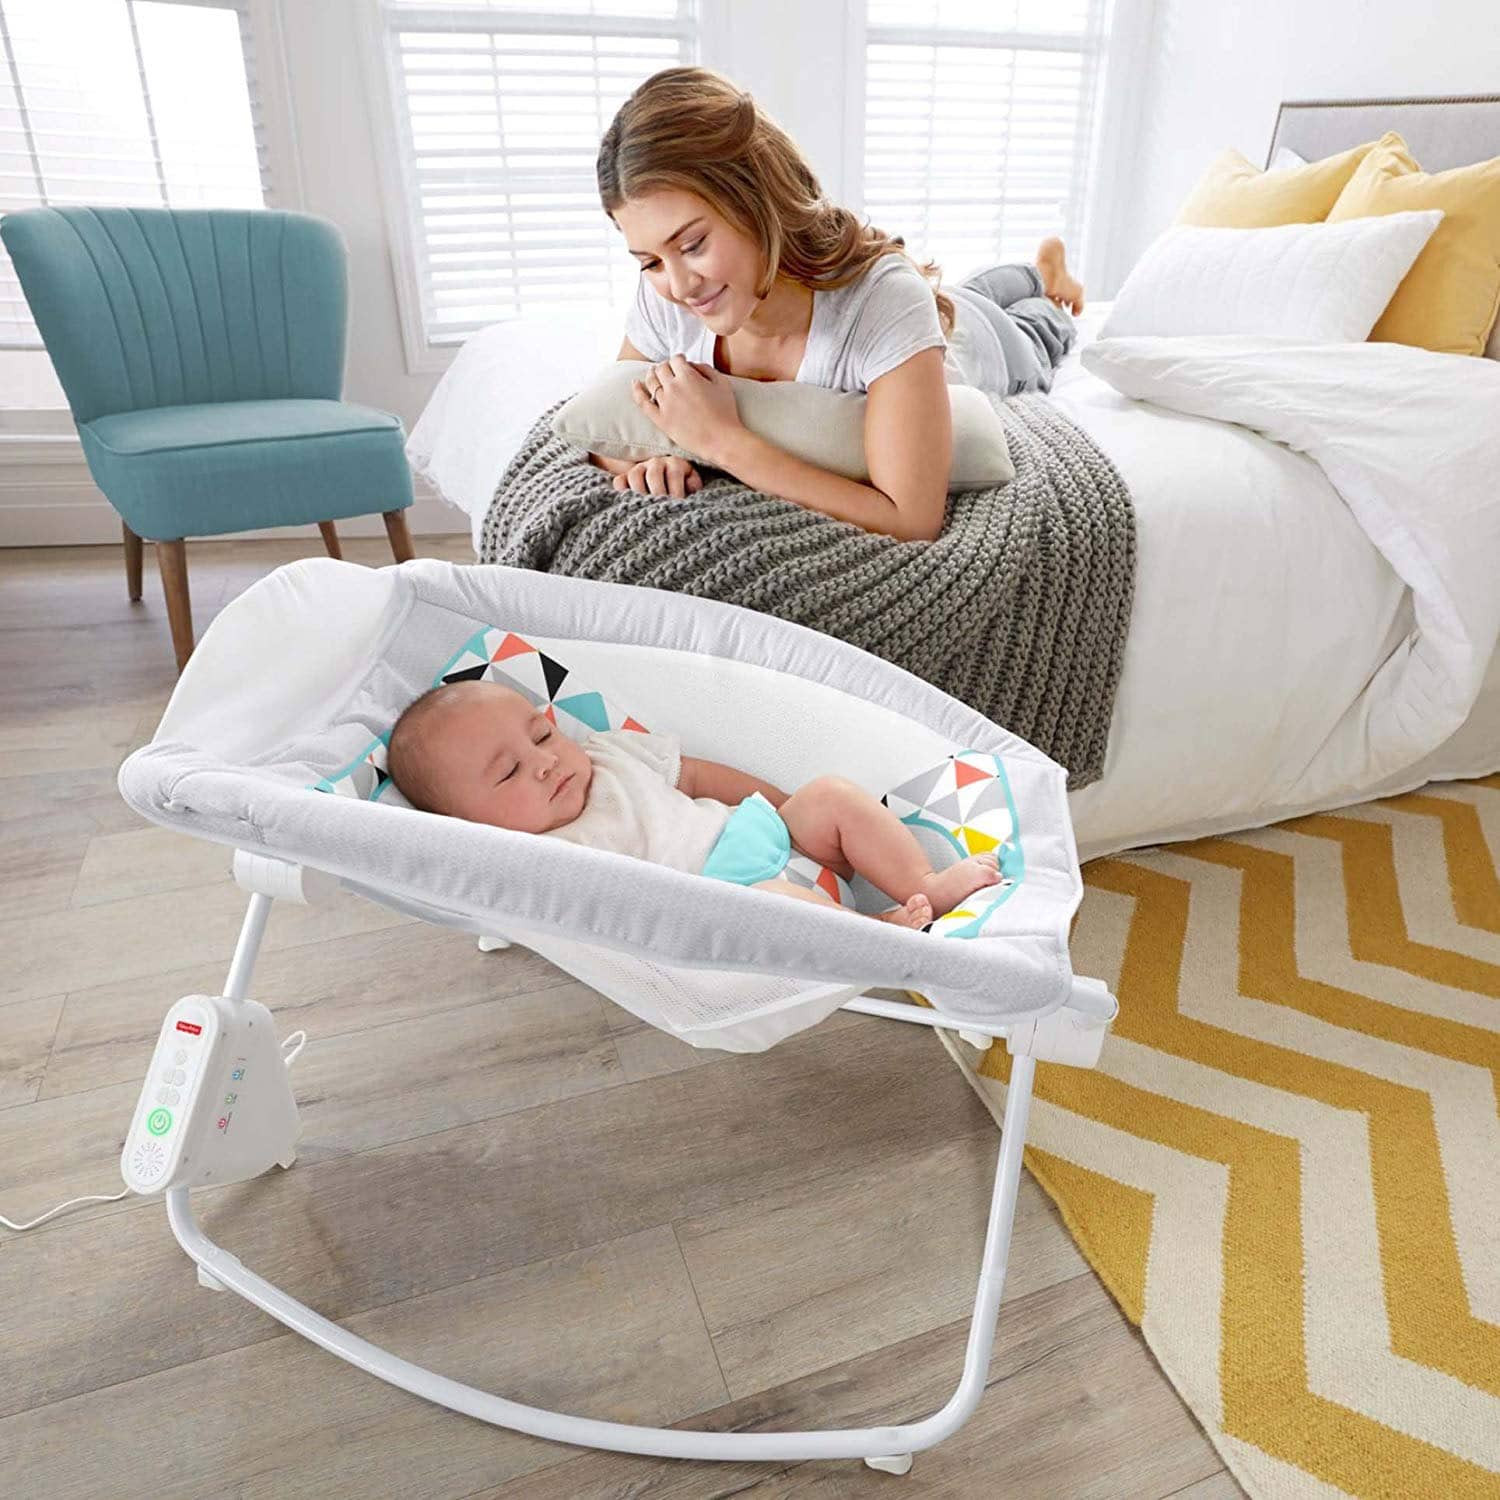 How Old Should A Baby Be To Use A Baby Bouncer?